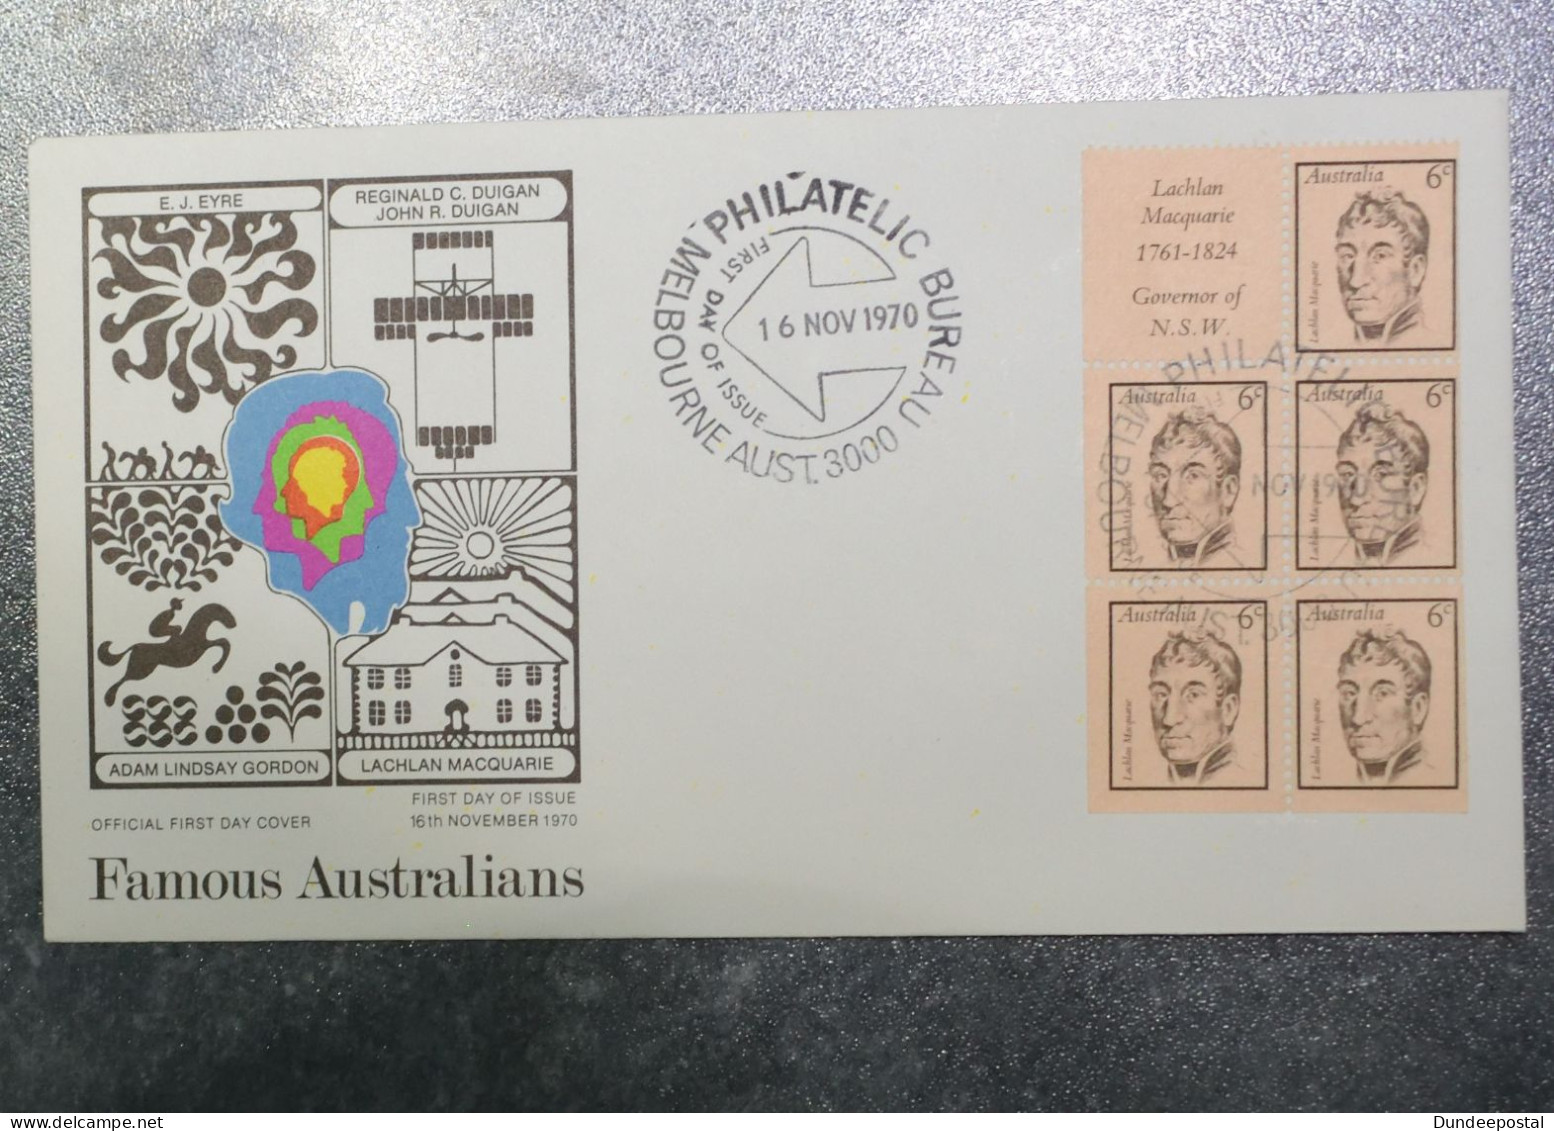 AUSTRALIA  First Day Cover  4x Famous Australians 1970  ~~L@@K~~ - Covers & Documents